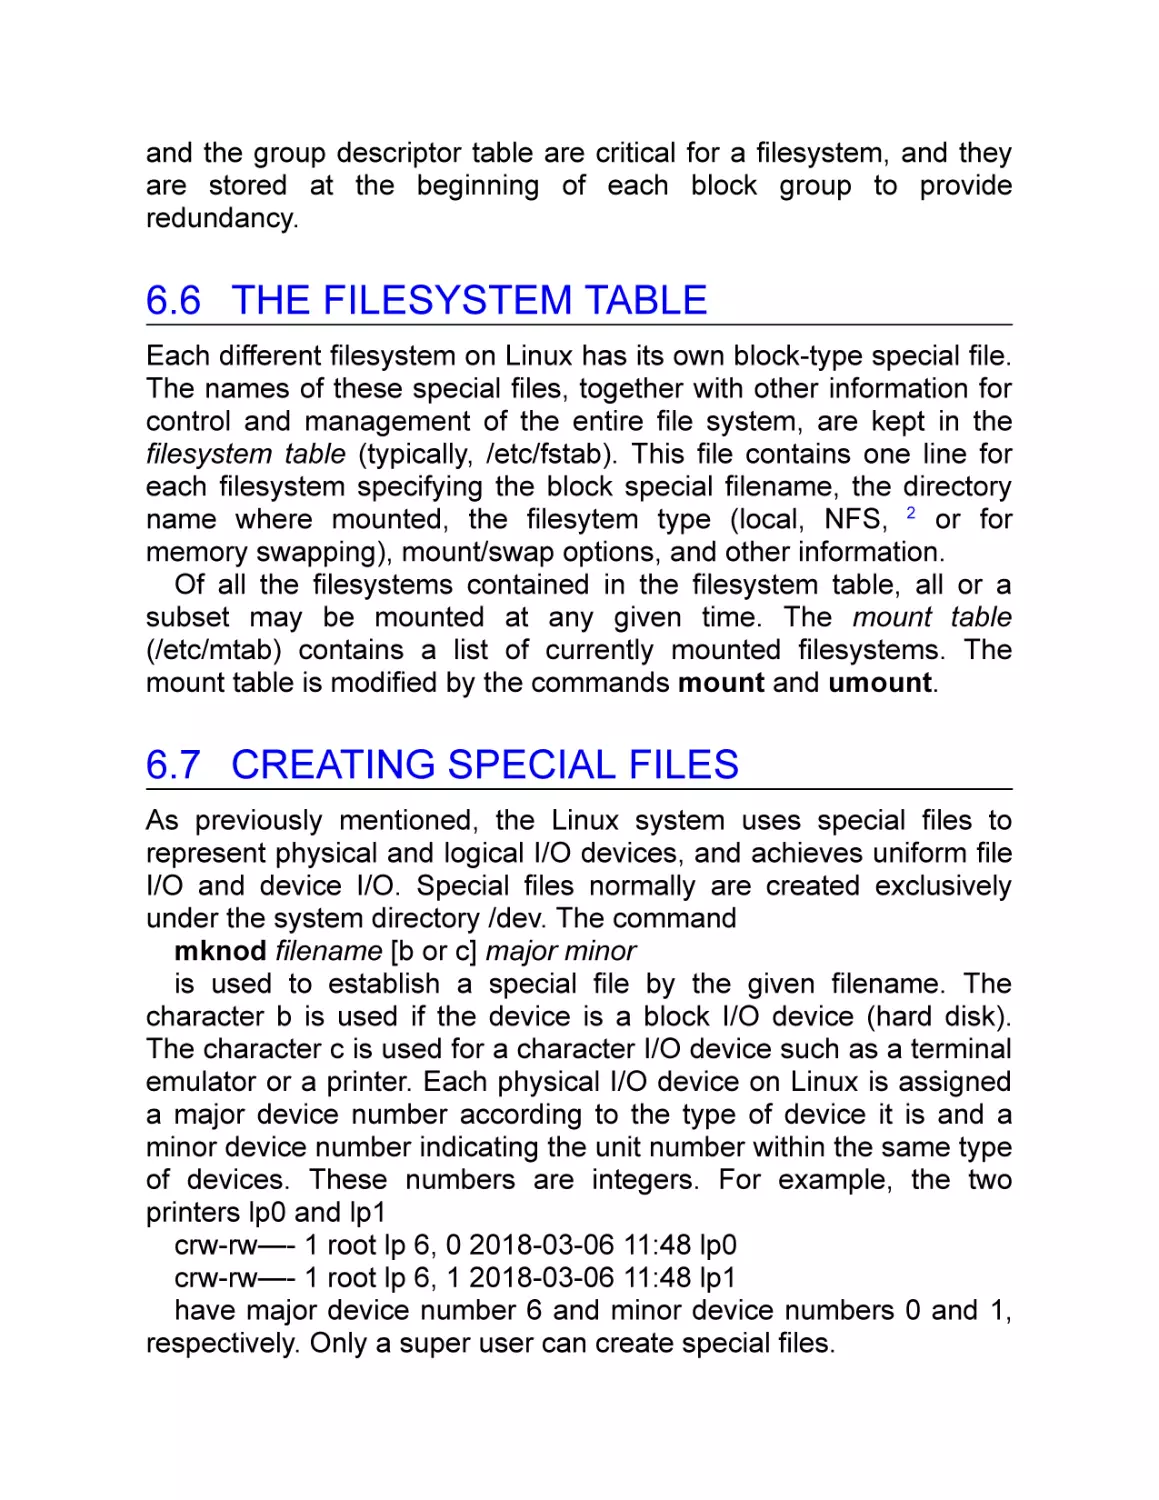 6.6 The Filesystem Table
6.7 Creating Special Files